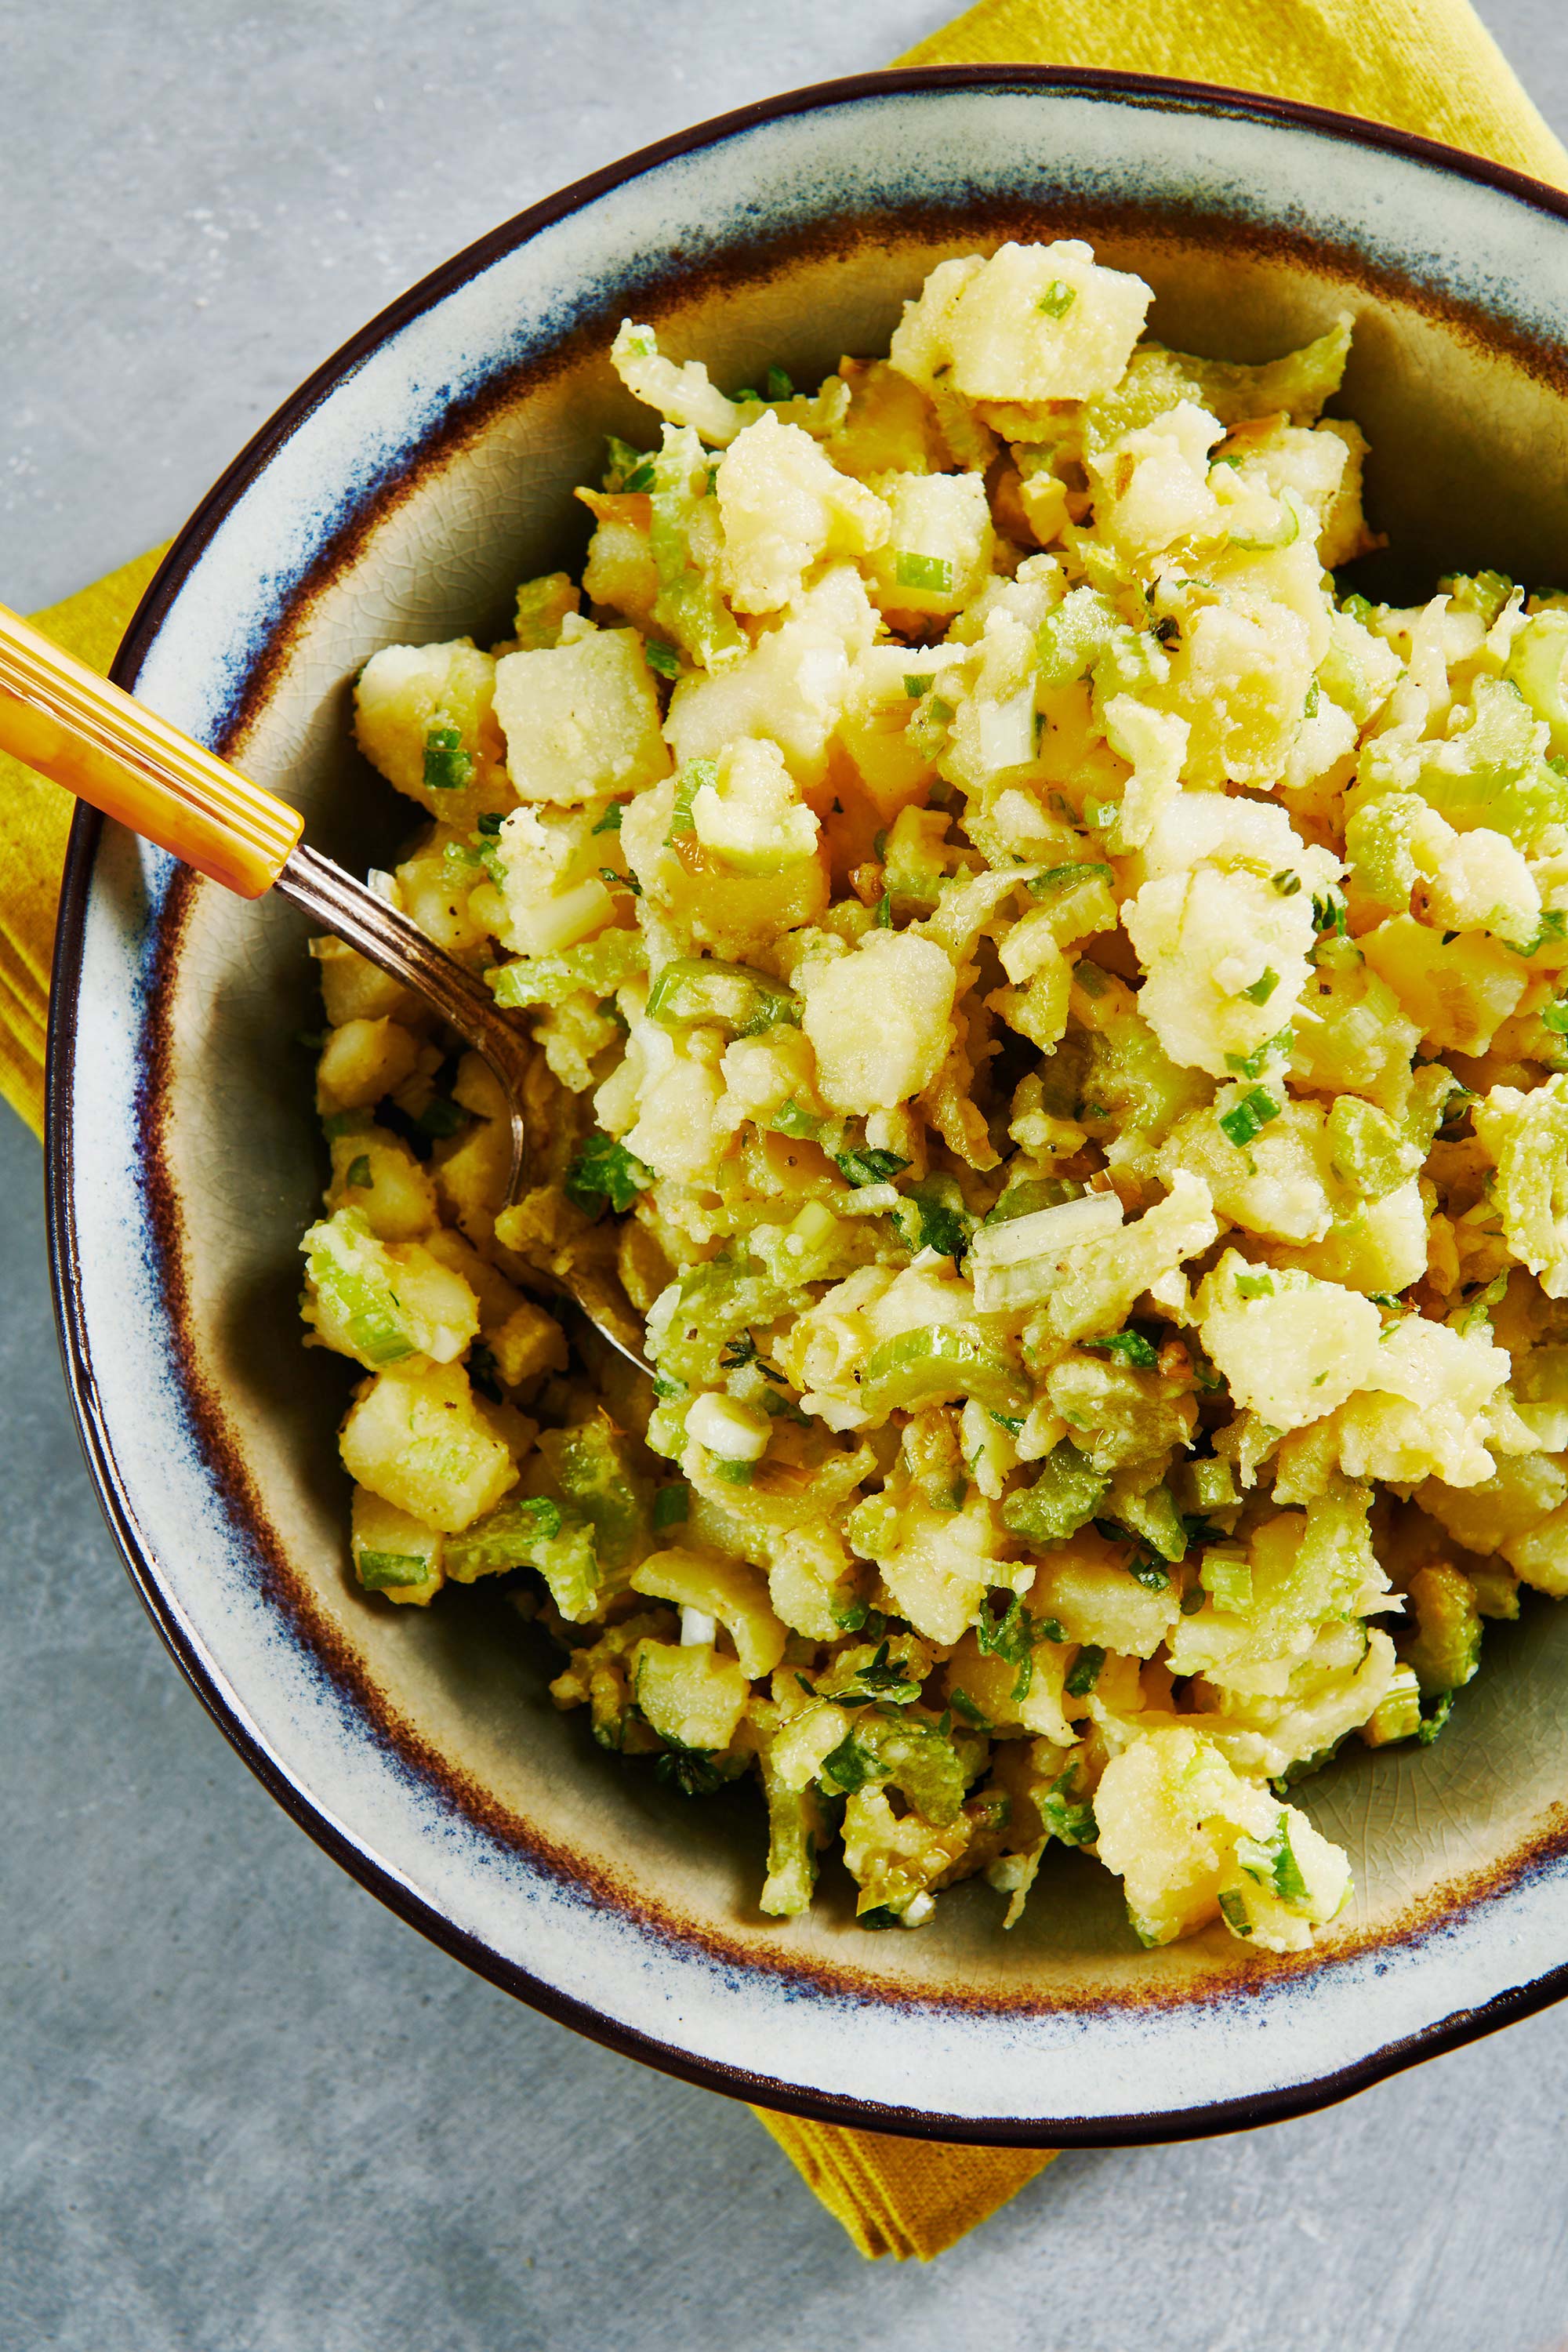 Vegan Potato Salad in a serving bowl with a yellow-handled serving spoon.